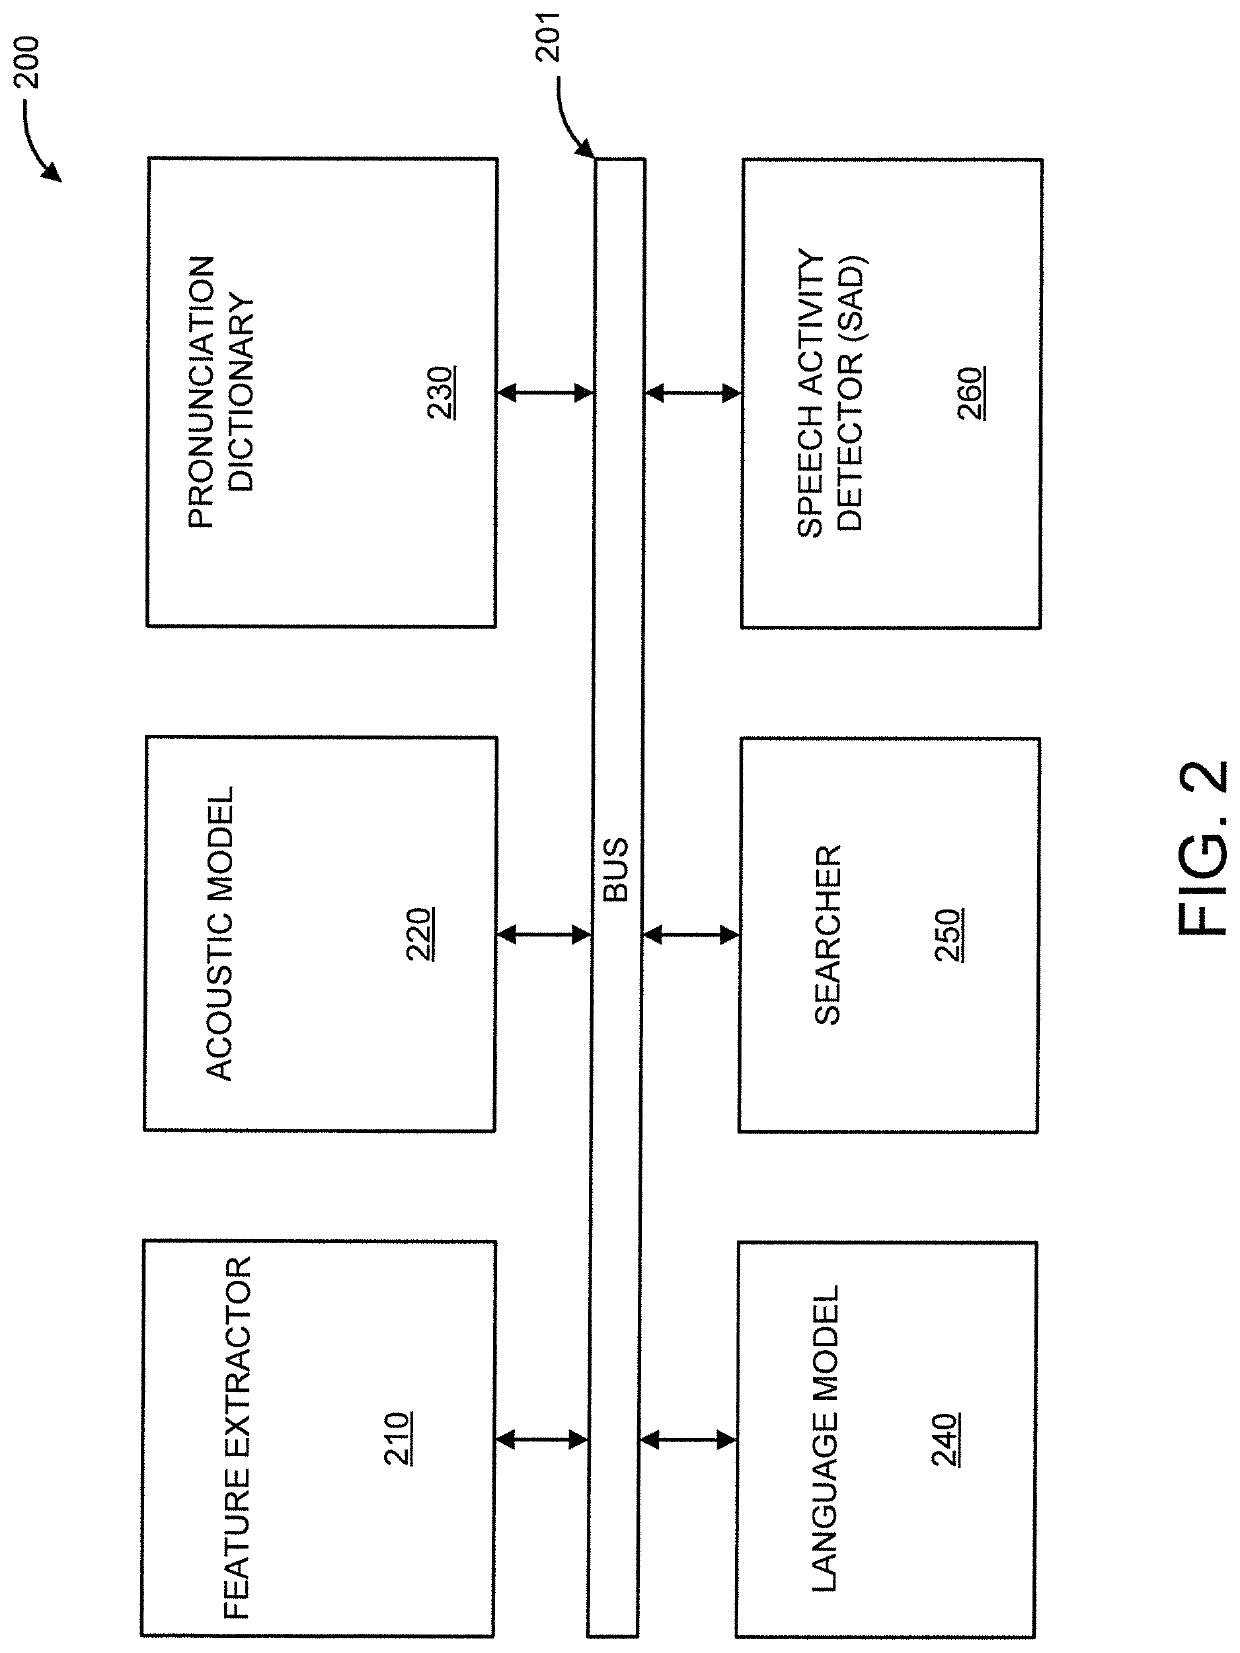 Feature and feature variant reconstruction for recurrent model accuracy improvement in speech recognition